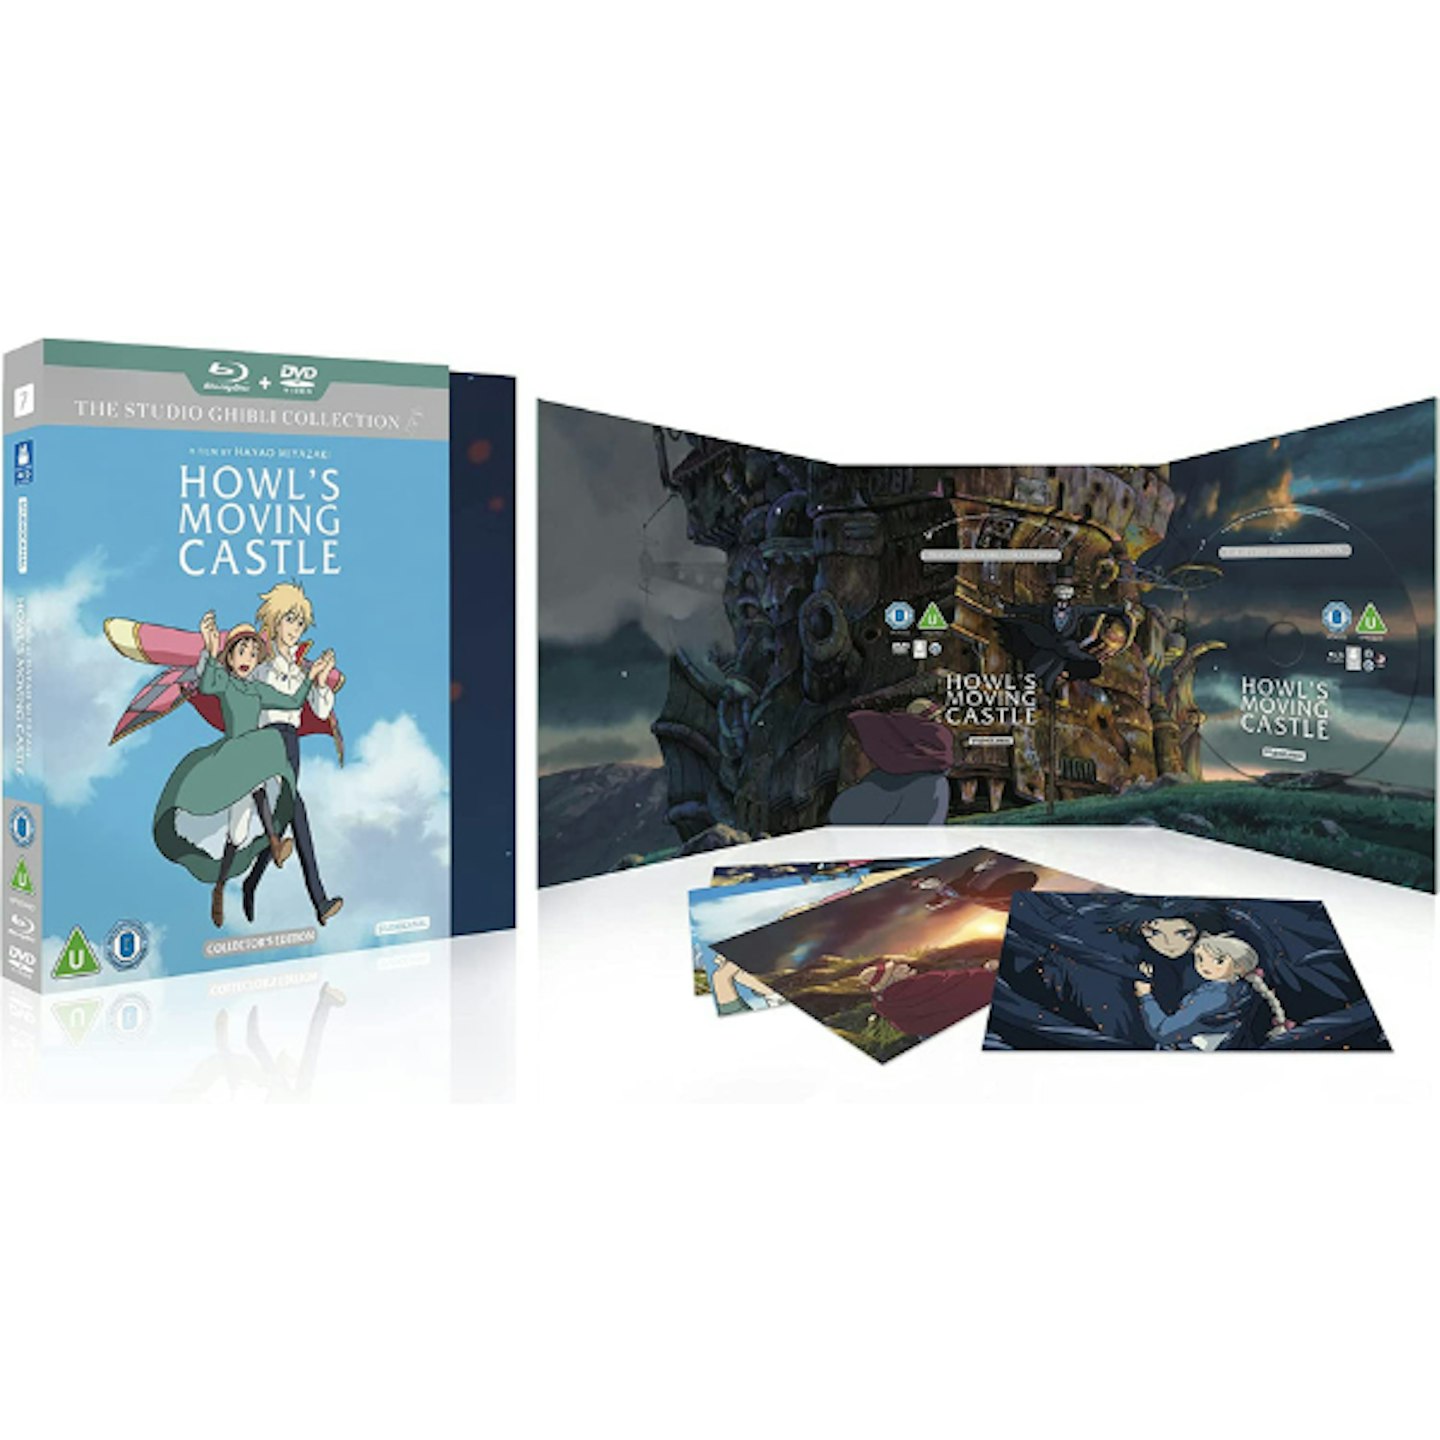 Howl's Moving Castle – 15th Anniversary Collector's Edition